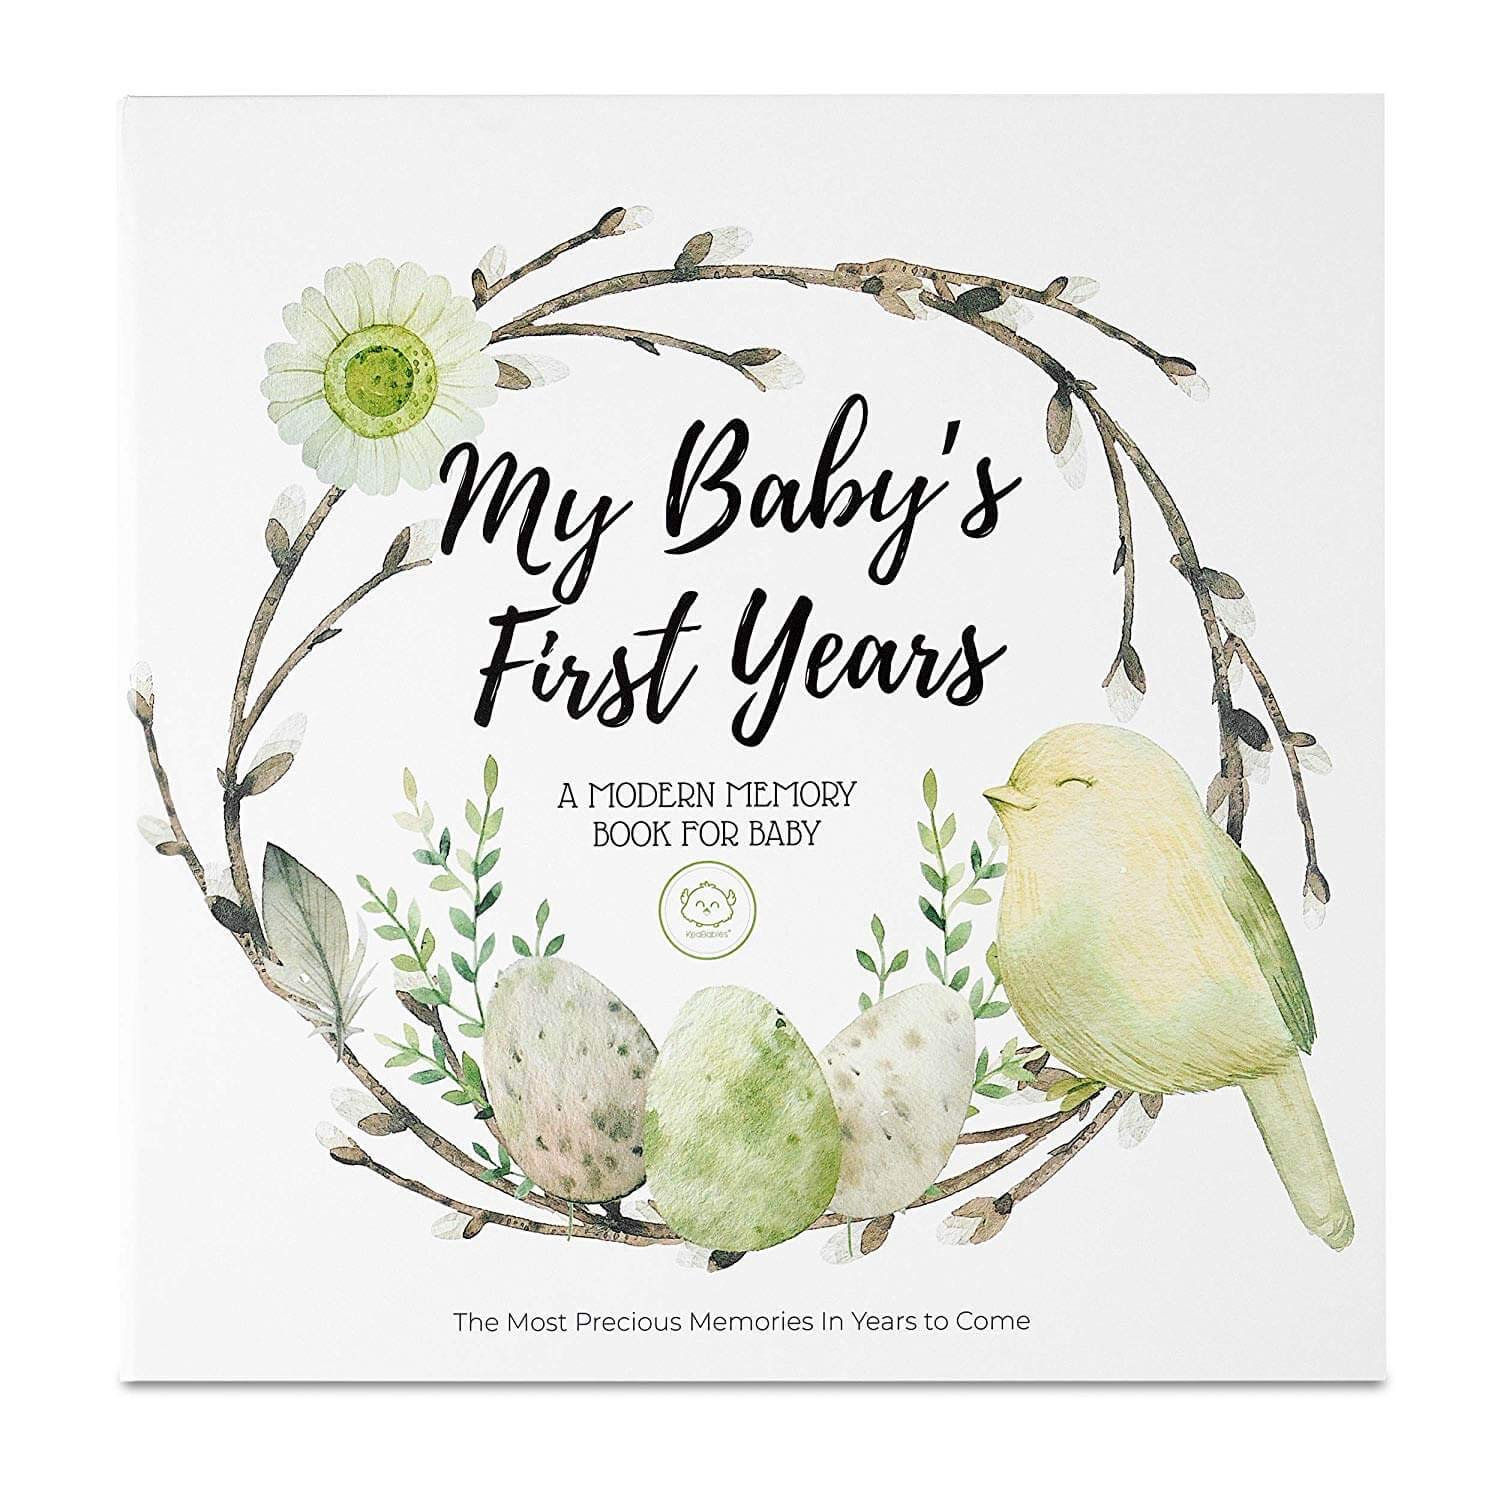 First 5 Years Baby Memory Book - 90 Pages Hardcover Baby Book Journal - First Year Baby Keepsake Book - Baby Milestone Book for Boys, Girls - Baby Books for Parents, Newborn Gifts (Wonderland)